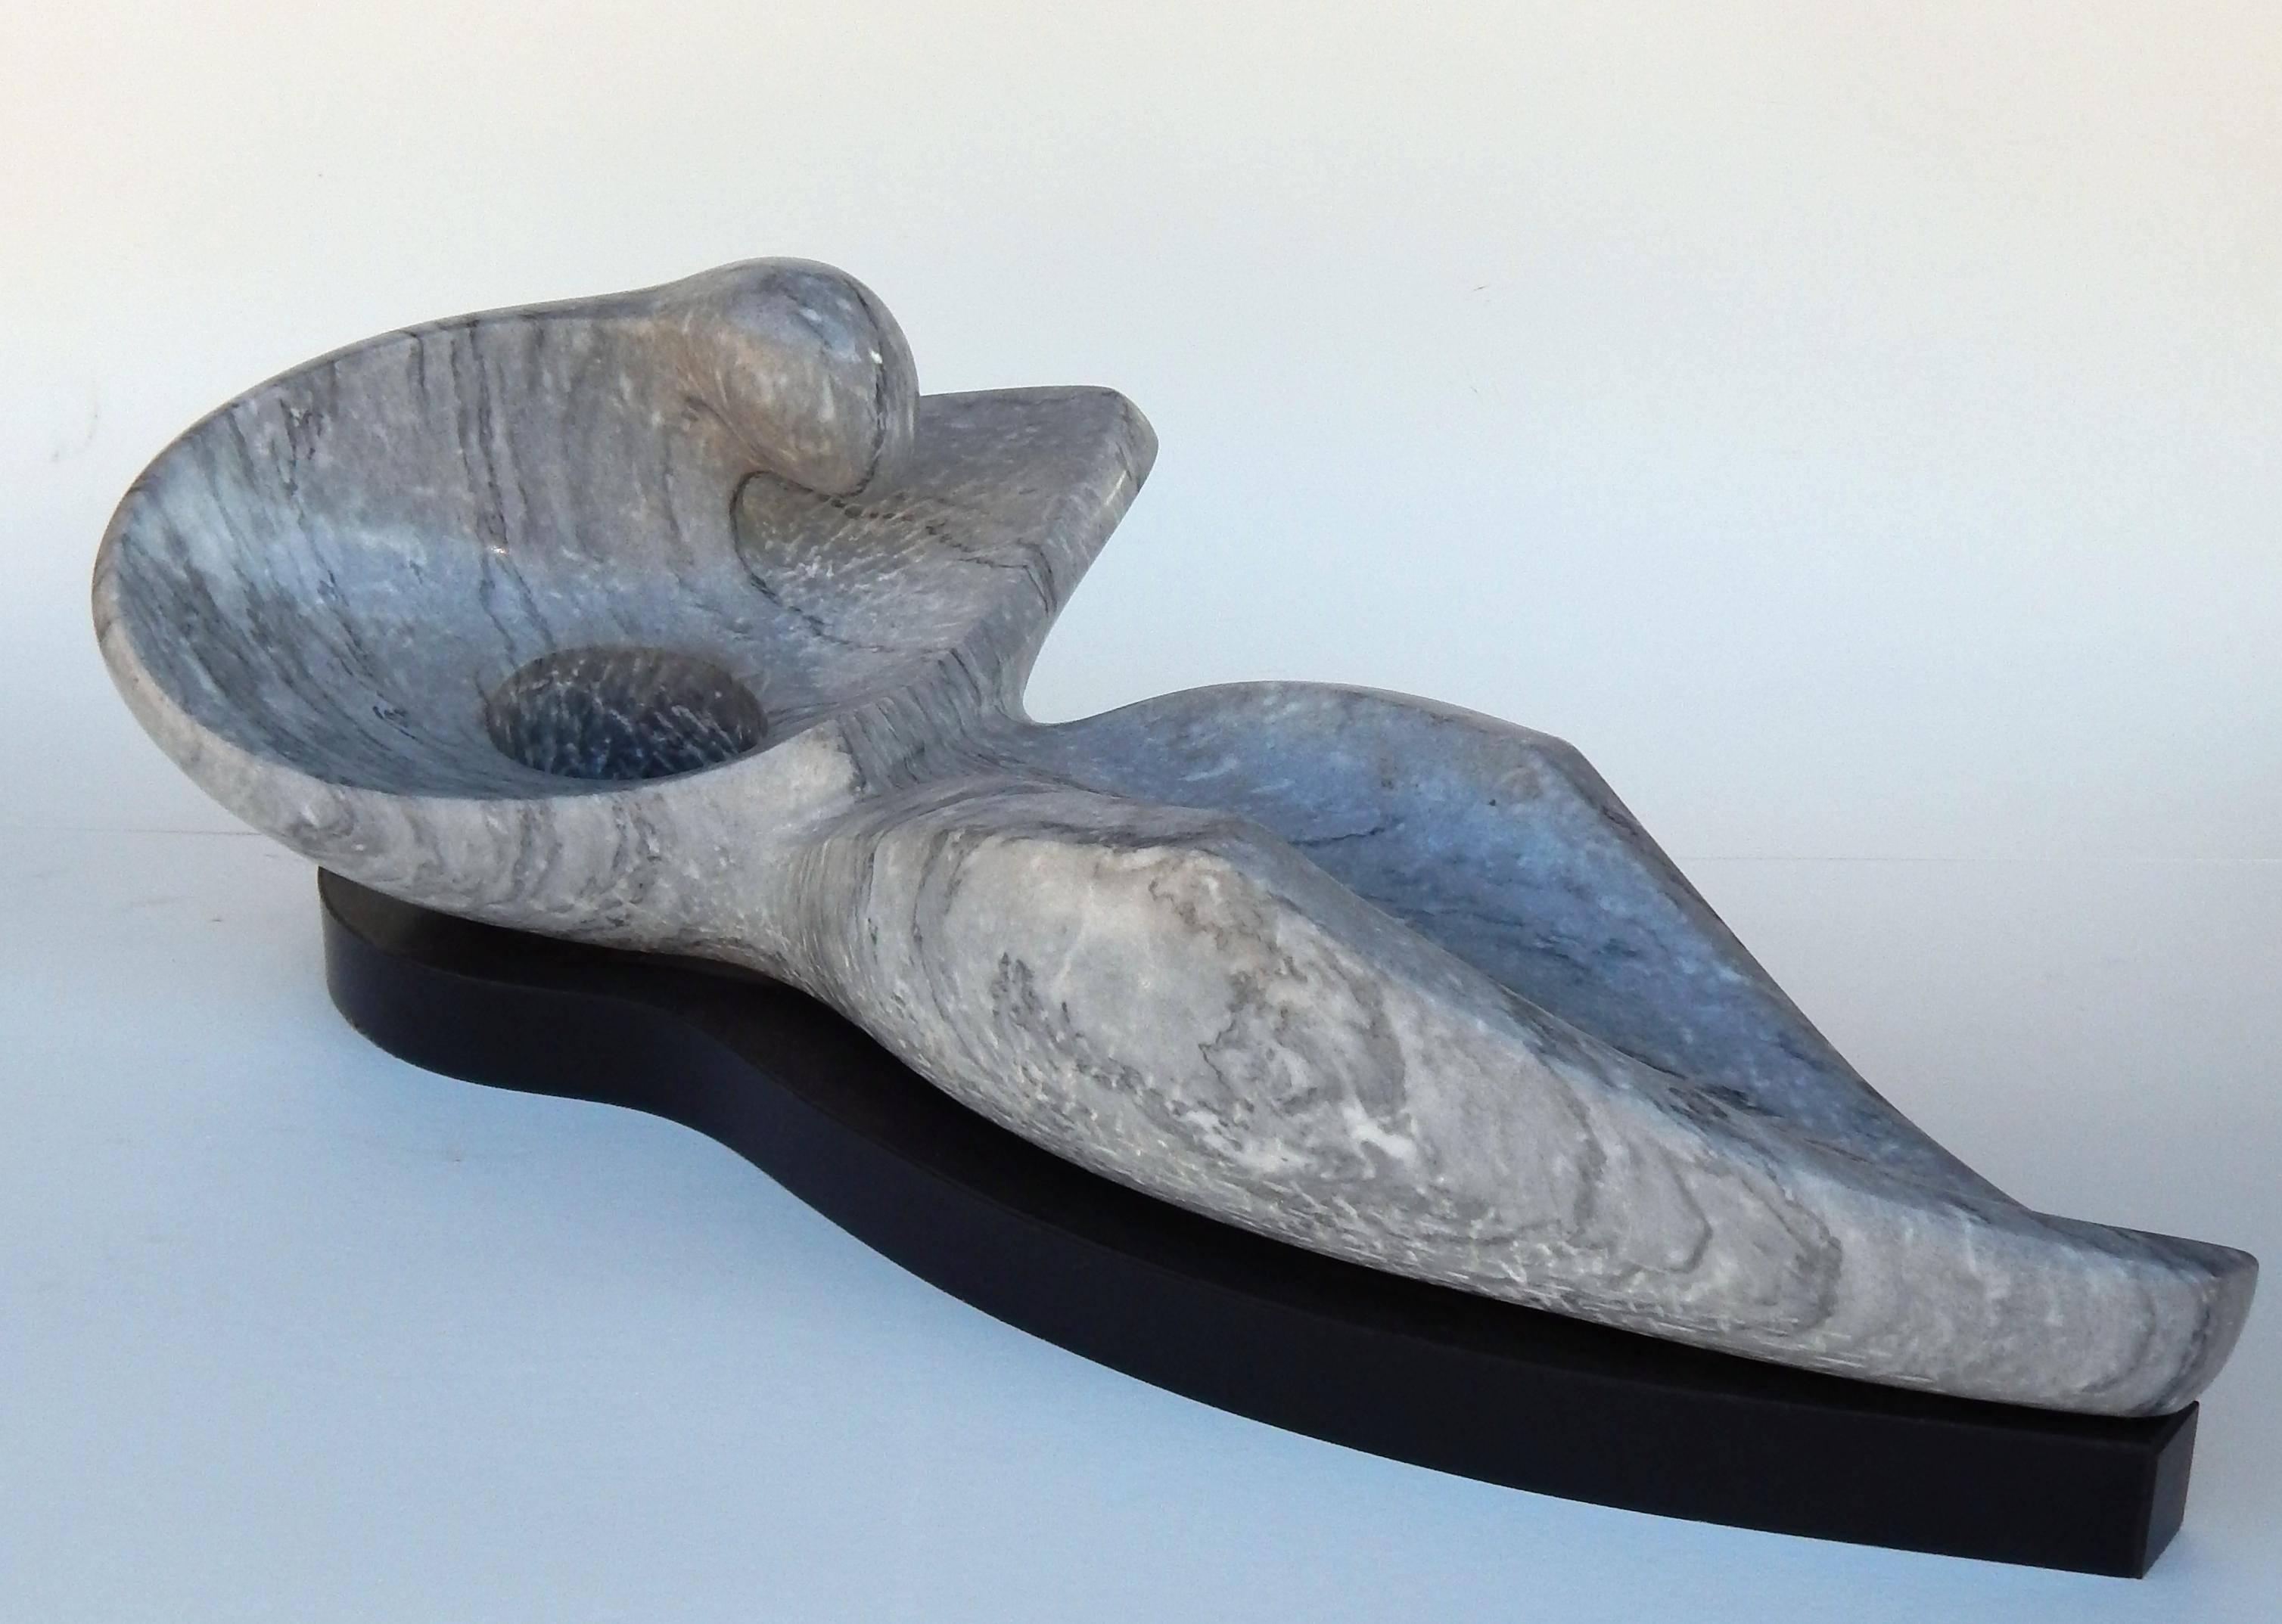 One of a kind marble sculpture by Hungarian born artist.
Miklos Sebek (b. 1941).
Modernist abstract reclining figure.
Comes with 